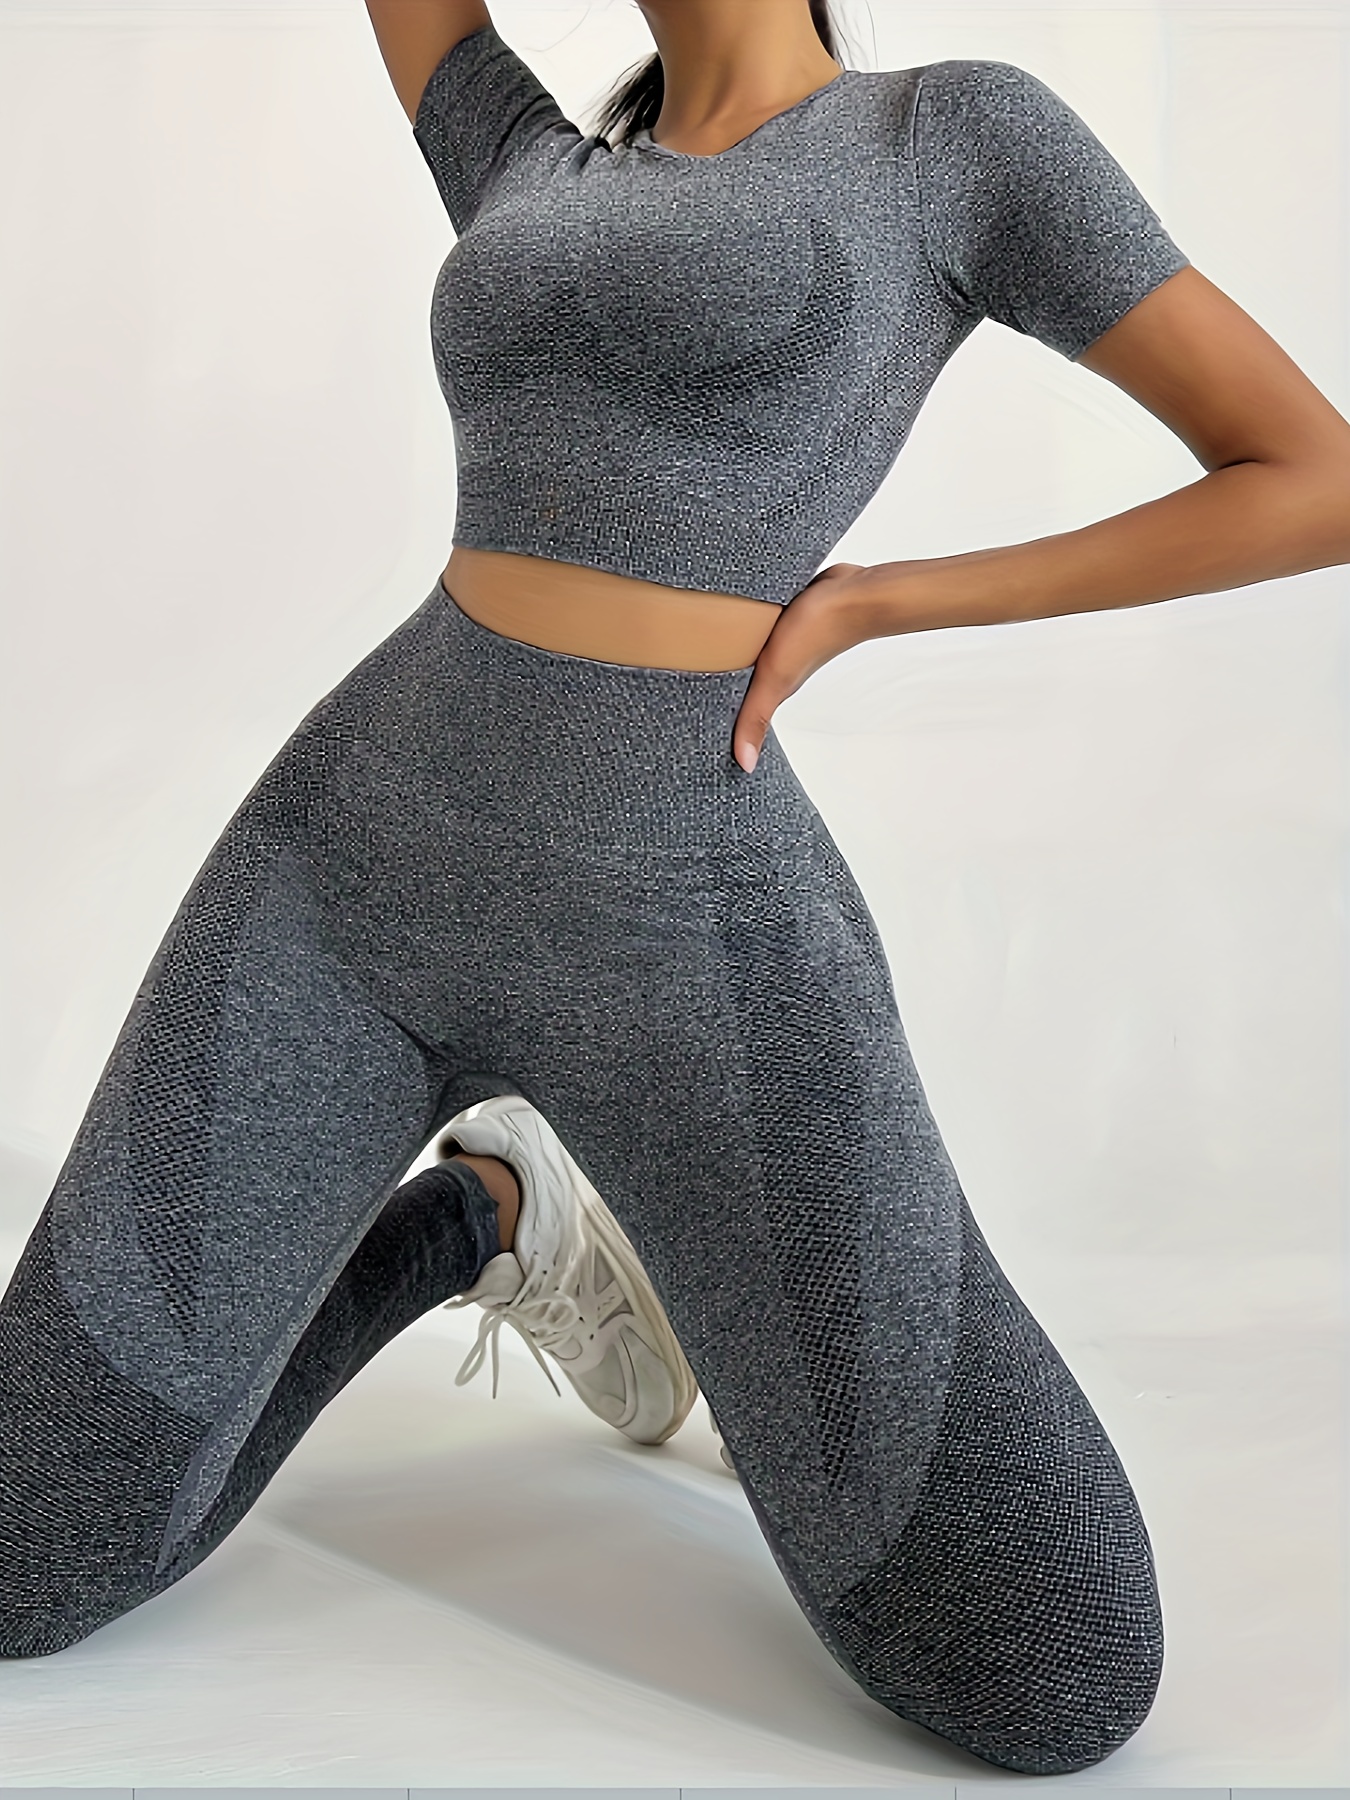 Women Yoga Sets Workout 2 Piece Outfit Seamless Running Crop Top High  Waisted Shorts Athletic Tracksuit Gym Clothes Sets Small Gray 